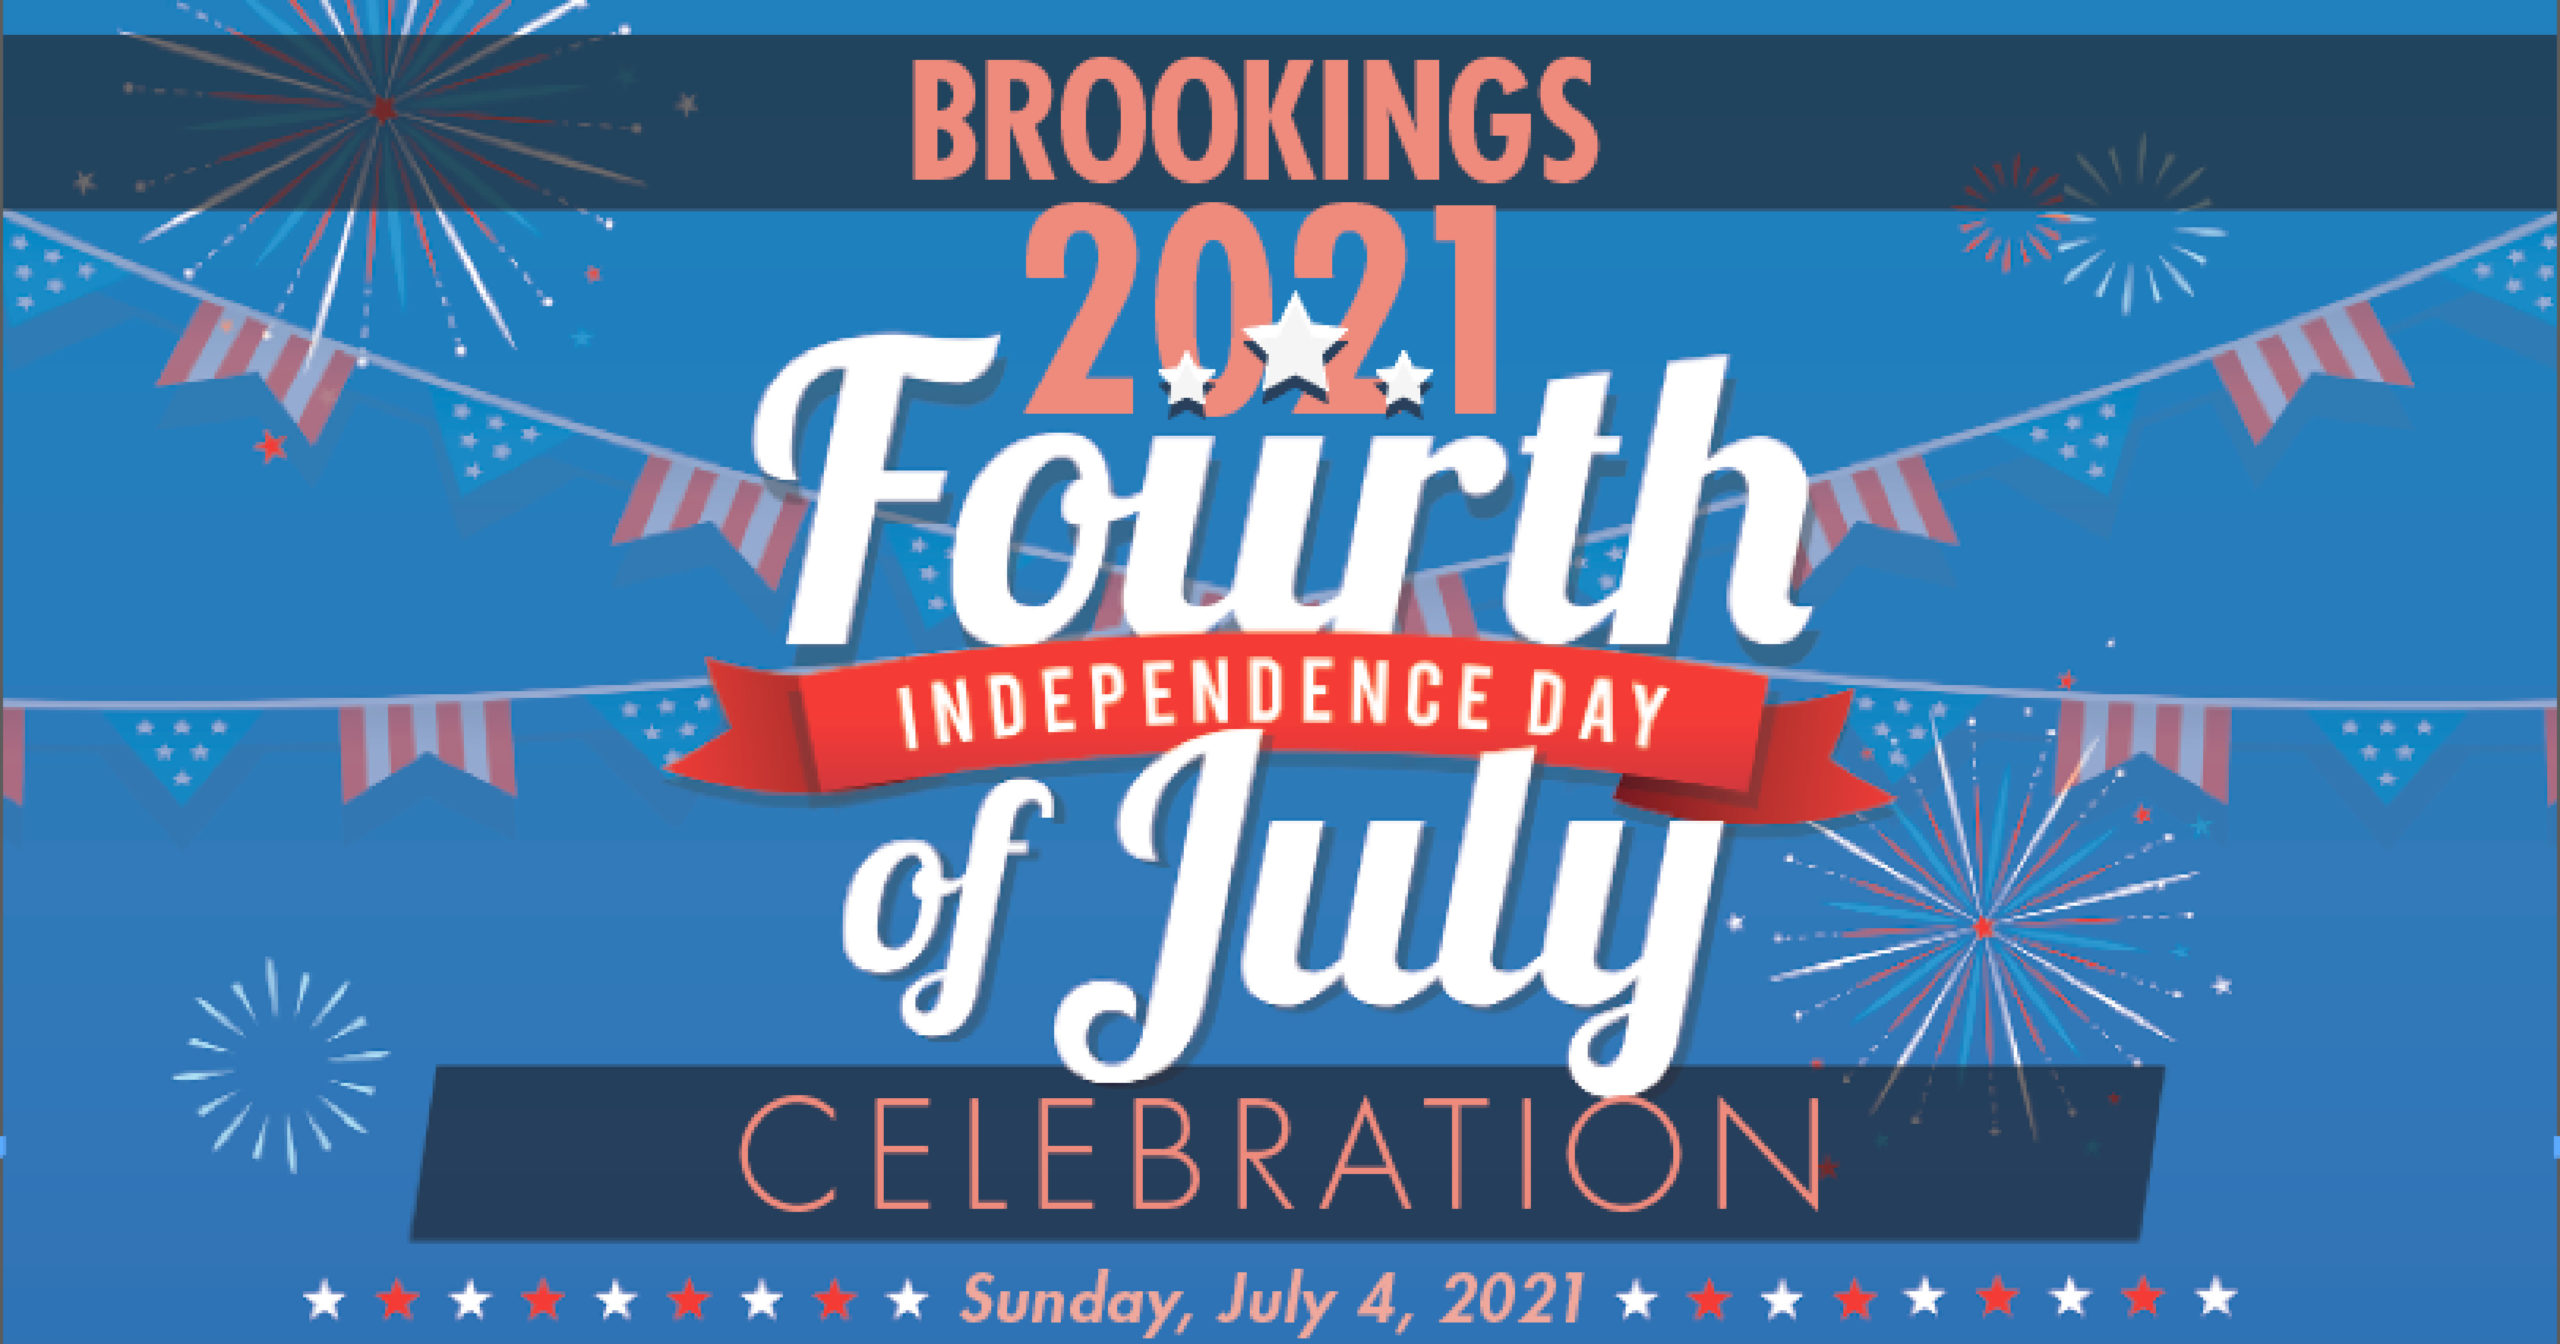 Brookings 2021 Fourth of July Independence Day Celebration – Fireworks Display